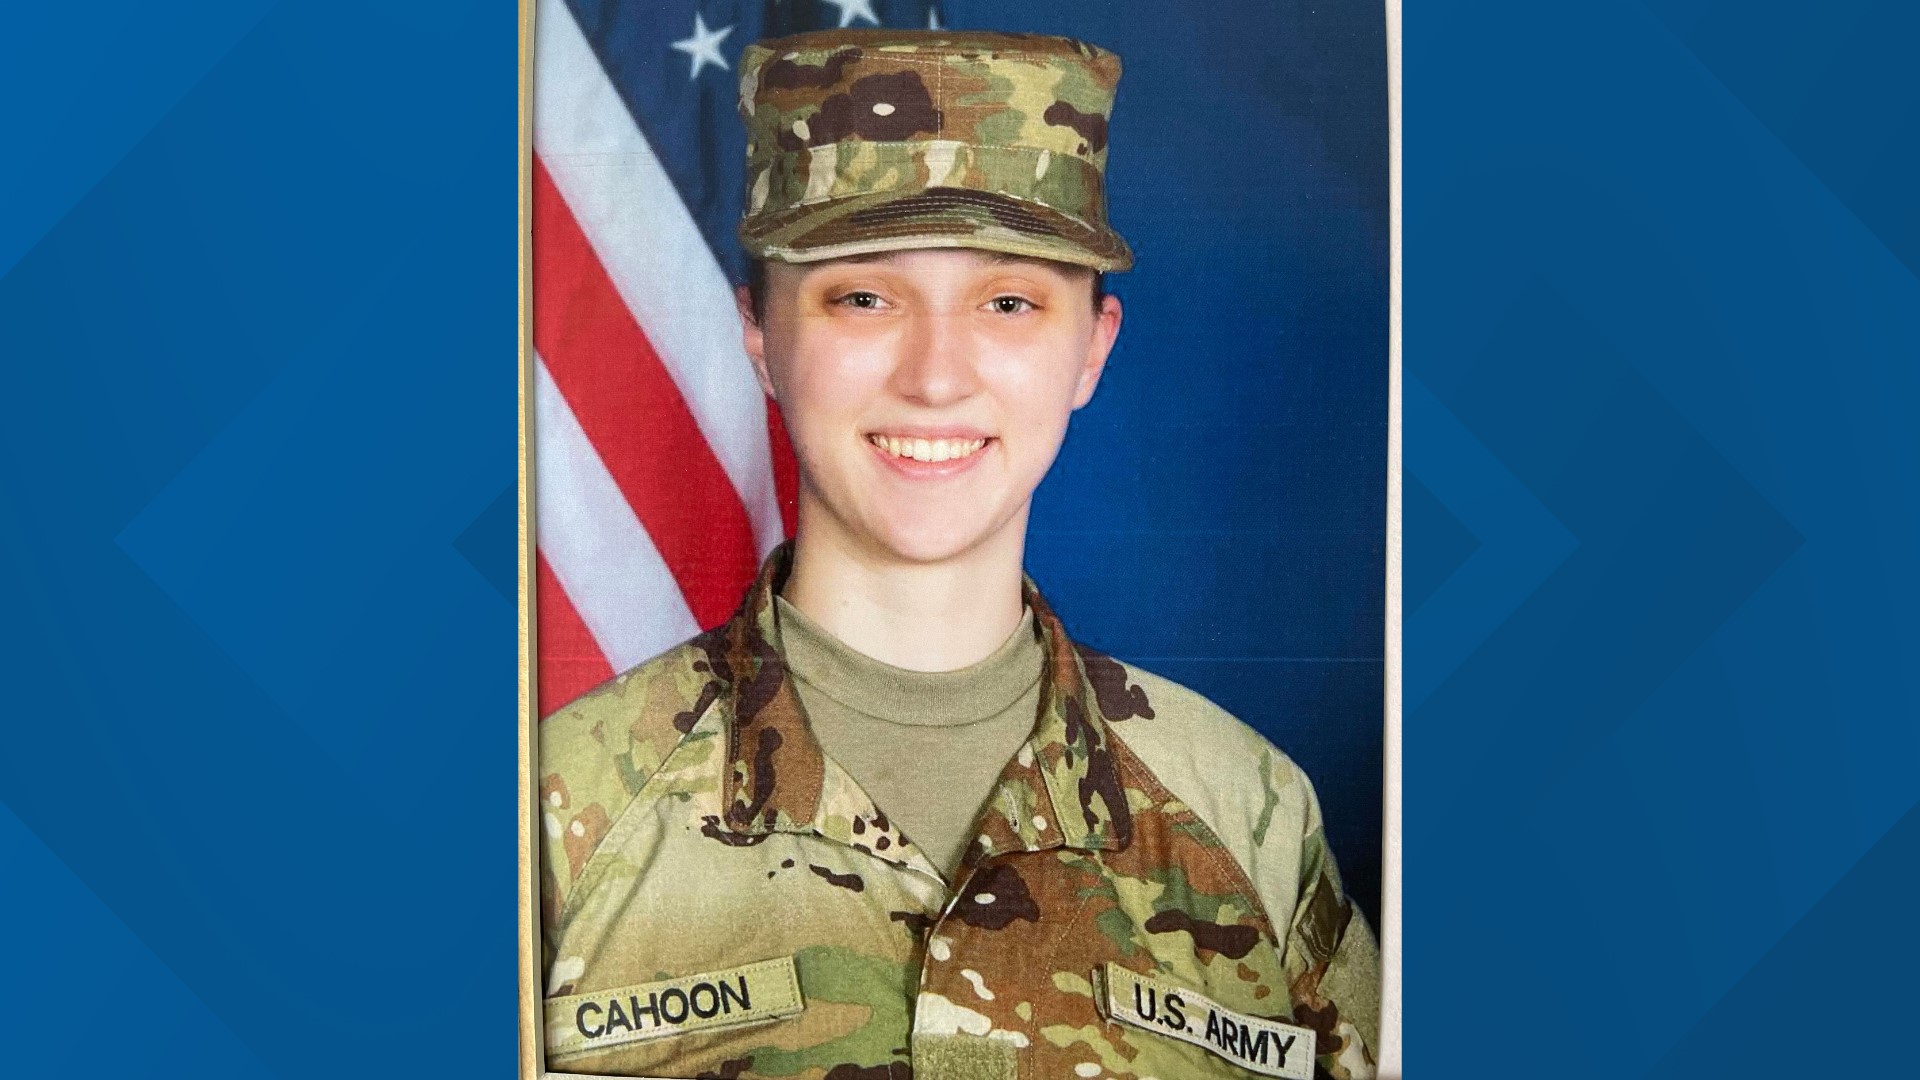 Alyssa Cahoon of Wayne County passed away several days after collapsing at a National Guard boot camp.